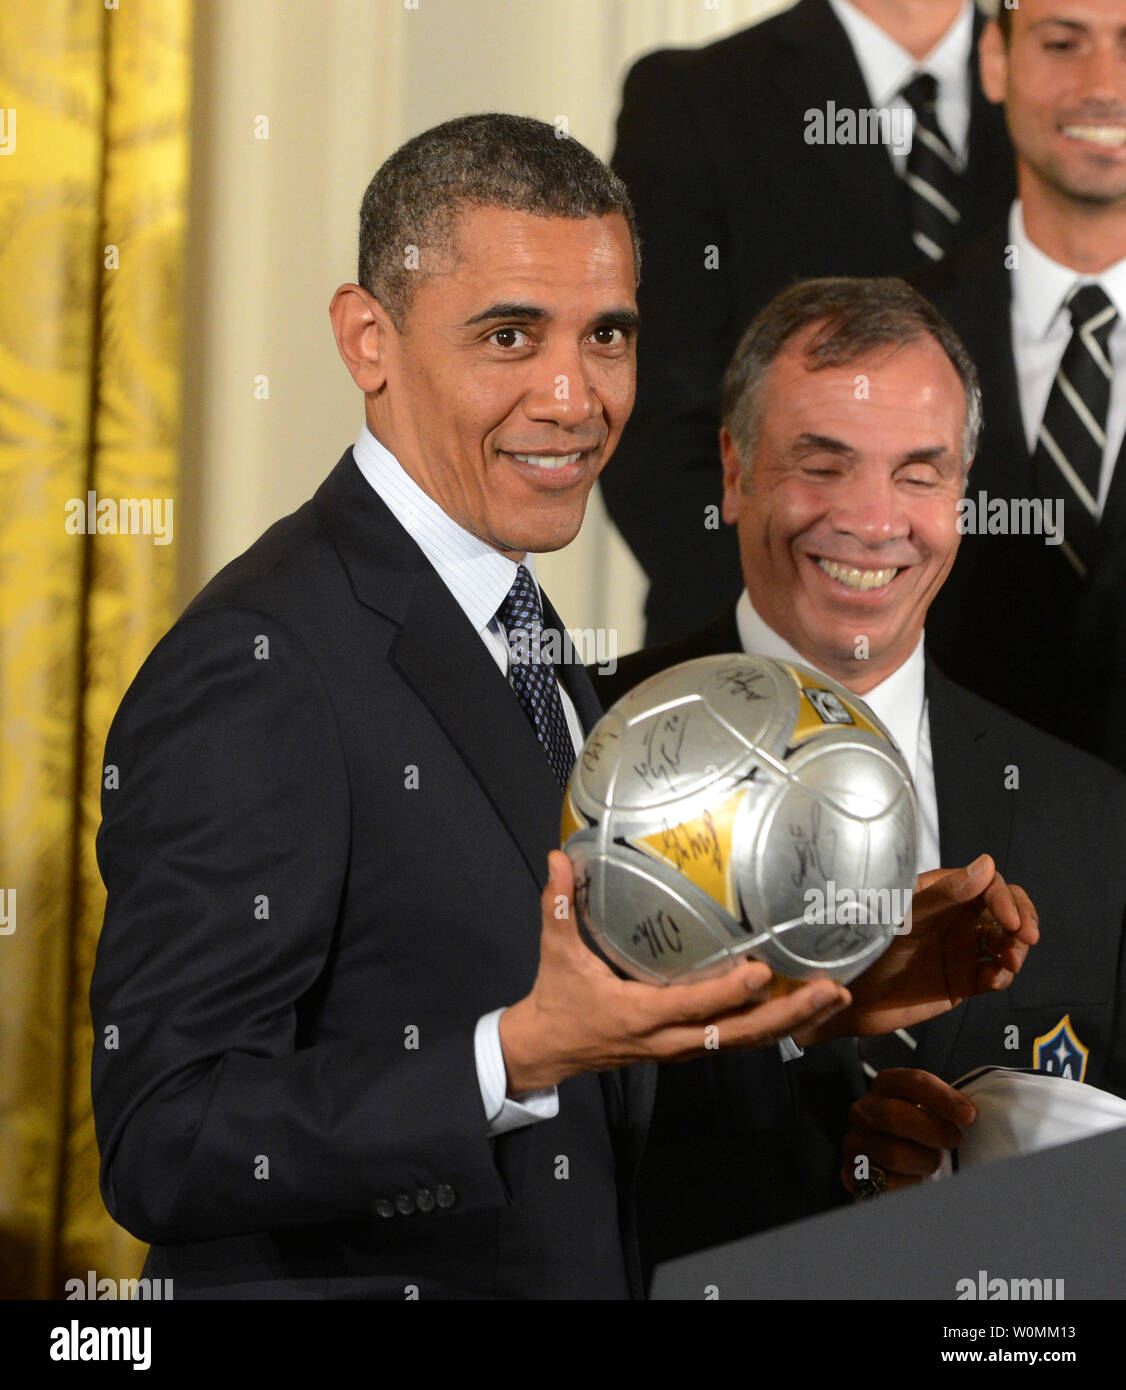 https://c8.alamy.com/comp/W0MM13/us-president-barack-obama-holds-a-soccer-ball-with-la-galaxy-head-coach-bruce-arena-during-an-east-room-ceremony-honoring-players-and-coaches-from-the-major-league-soccer-mls-champions-la-galaxy-and-the-los-angeles-national-hockey-league-nhl-champions-los-angeles-kings-at-the-white-house-in-washington-dc-on-march-26-2013-upipat-benic-W0MM13.jpg